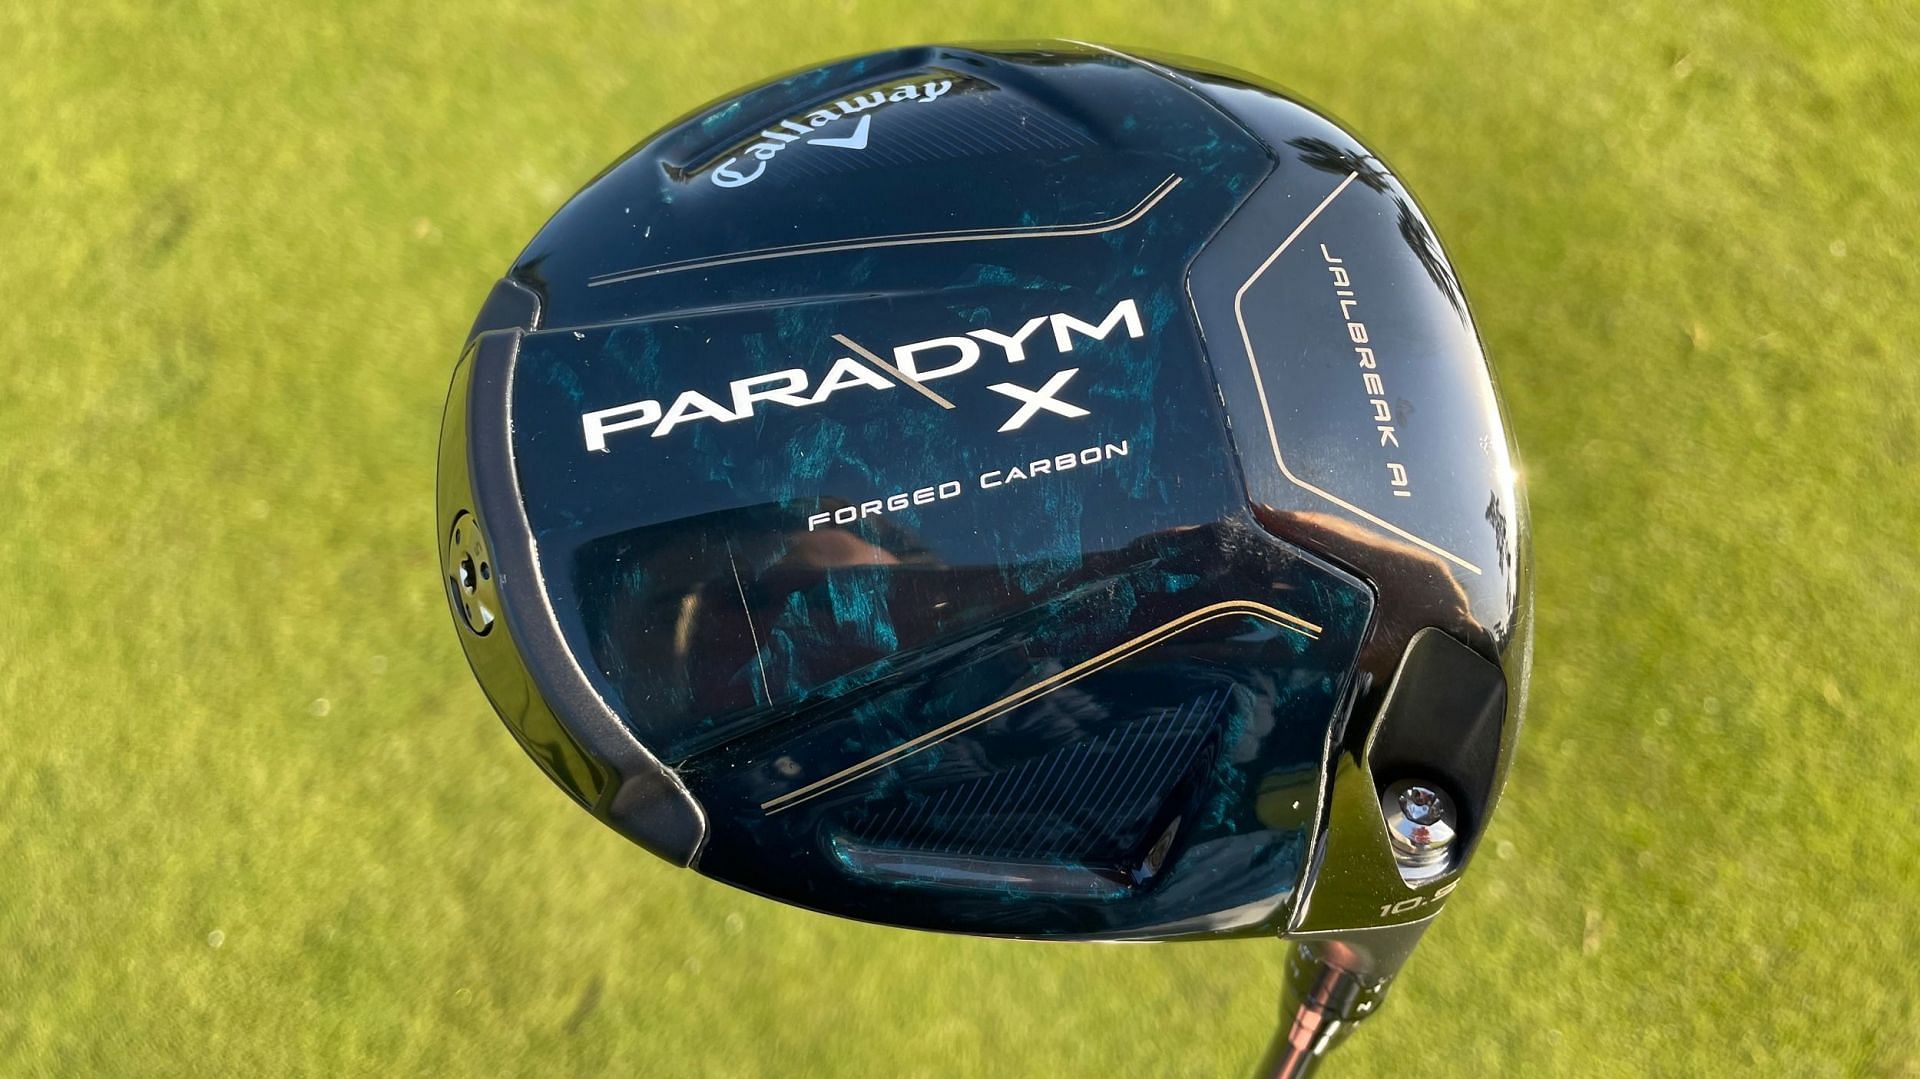 Callaway Paradym X will be available from February 24